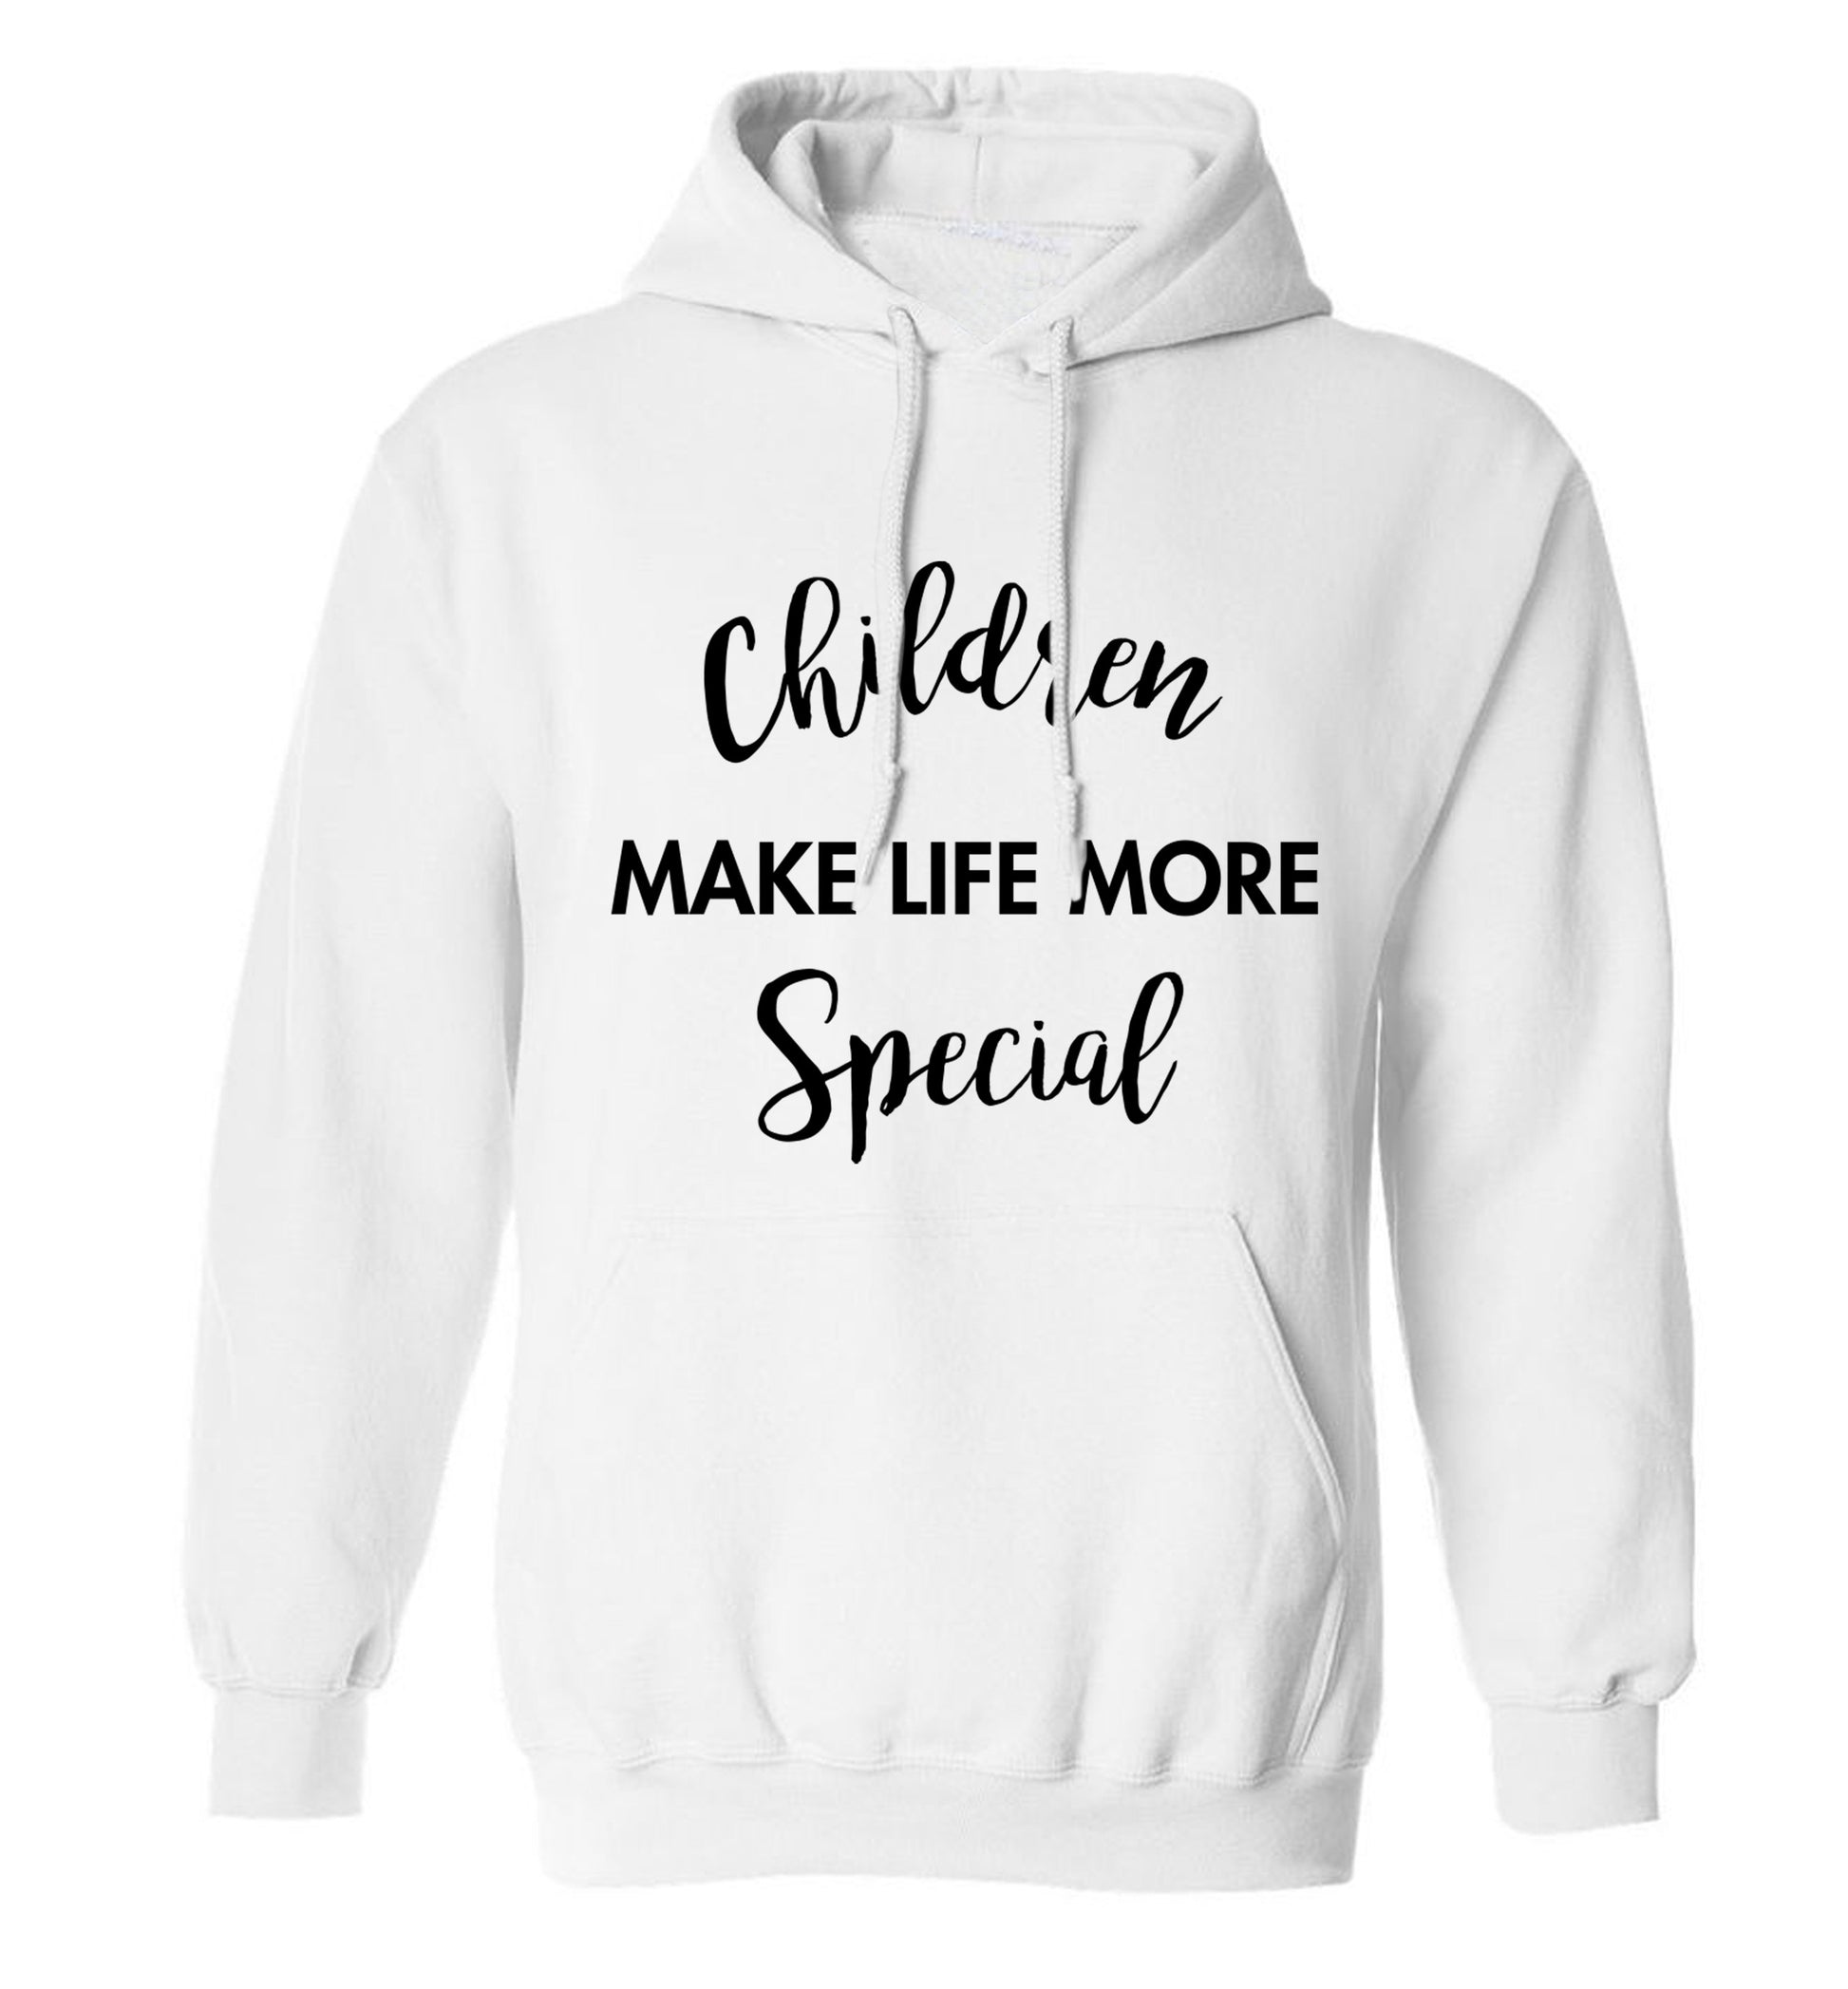 Children make life more special adults unisex white hoodie 2XL